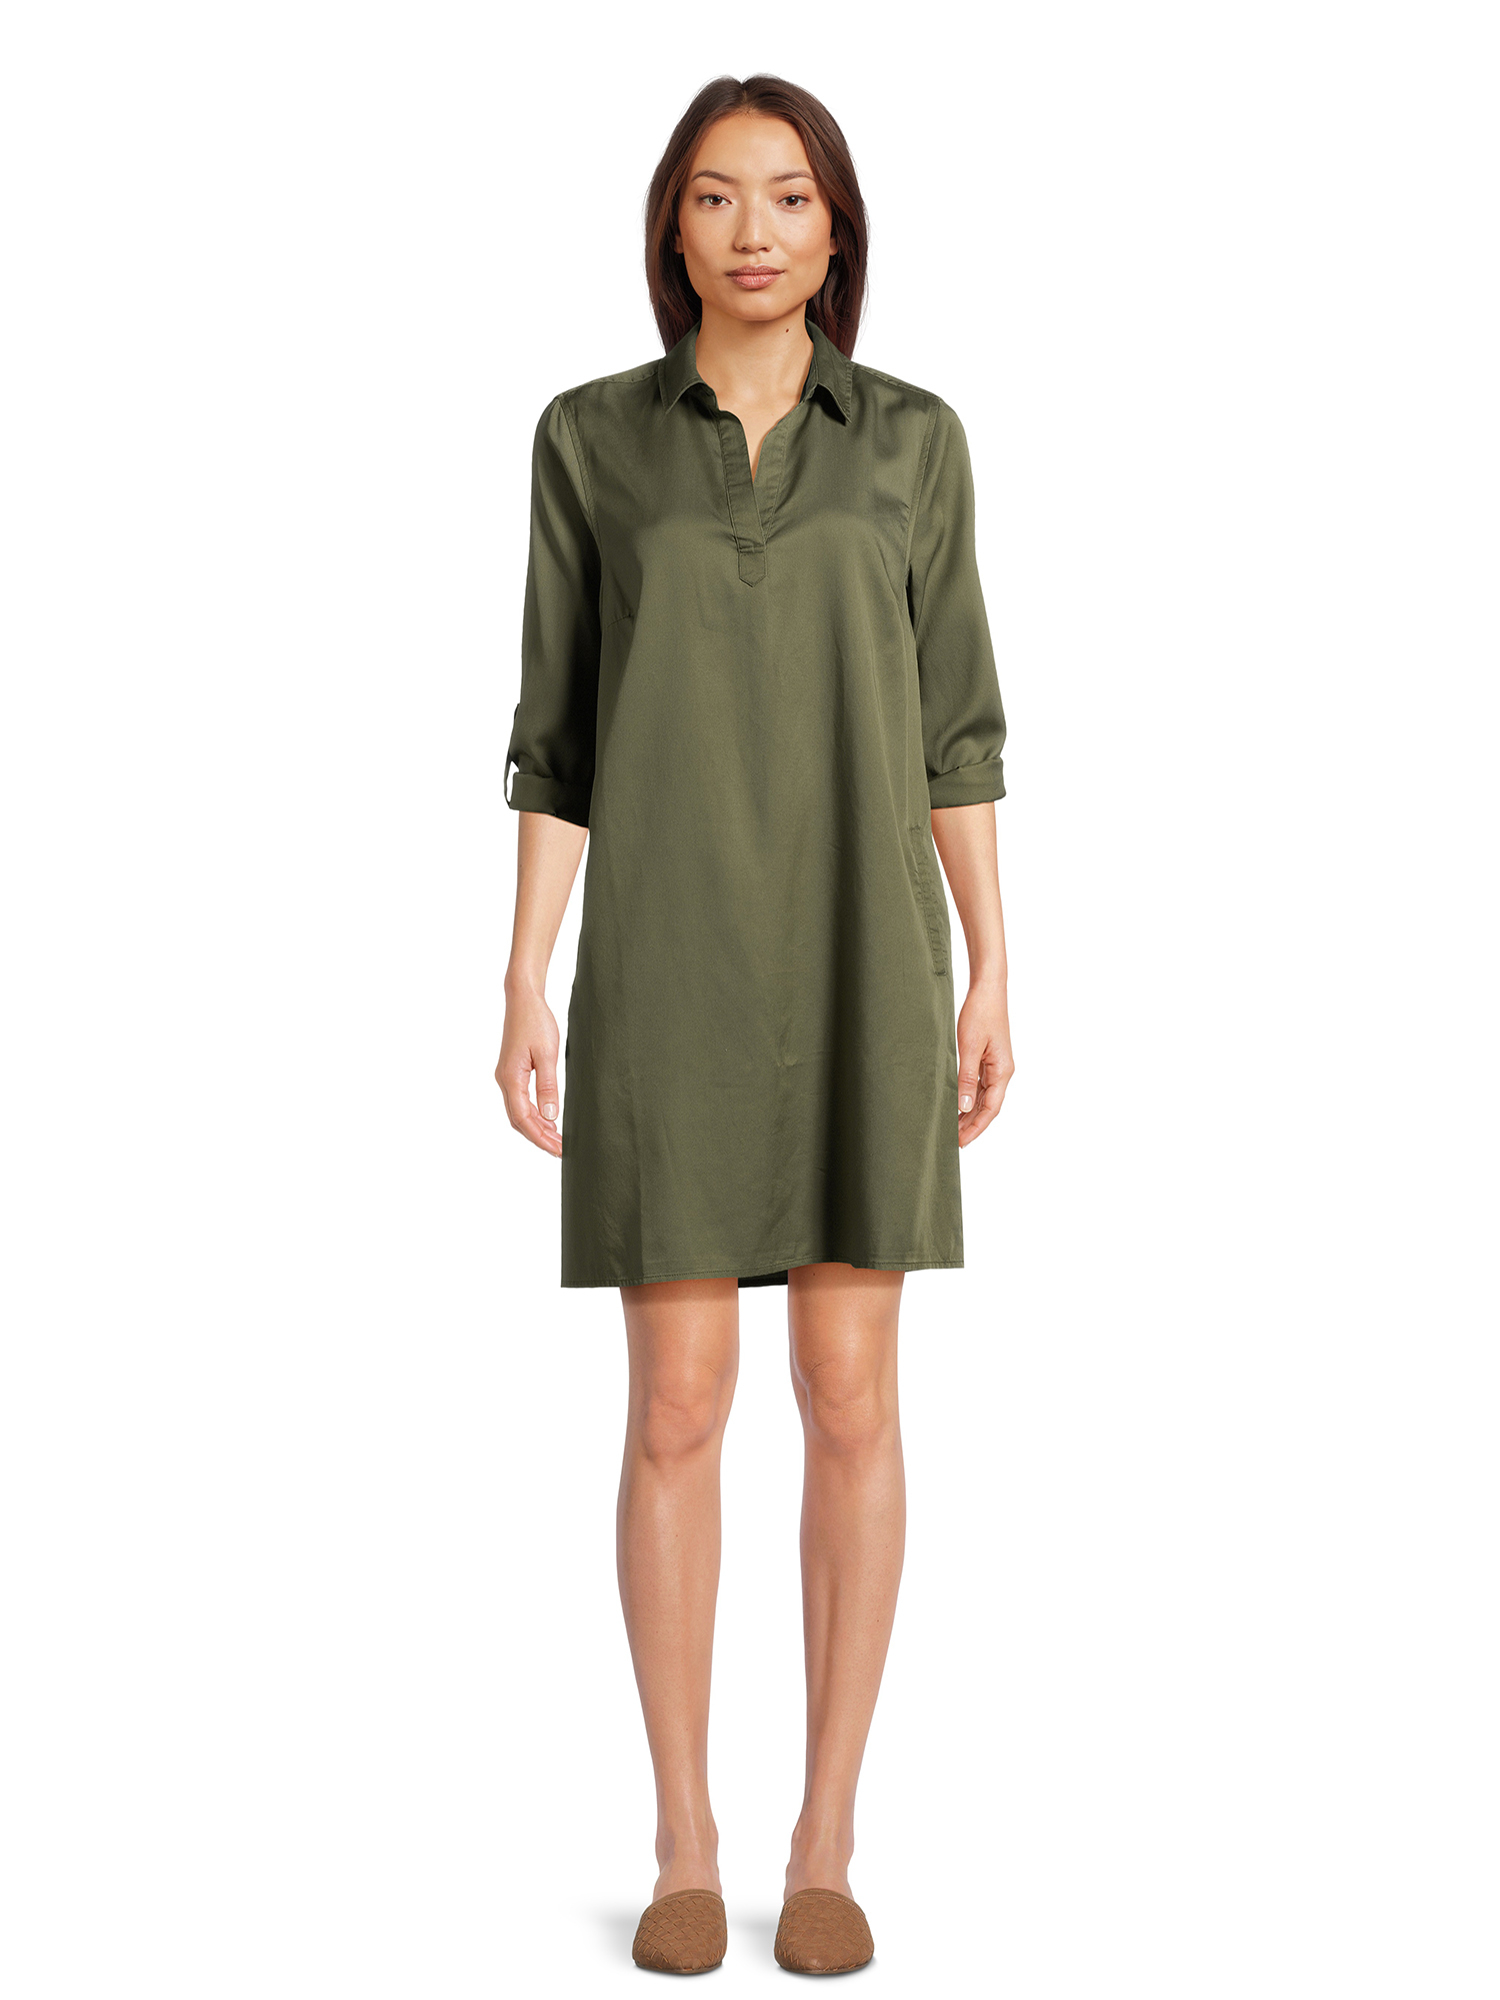 person in a knee-length shirt dress with three-quarter sleeves and collar, paired with flat shoes